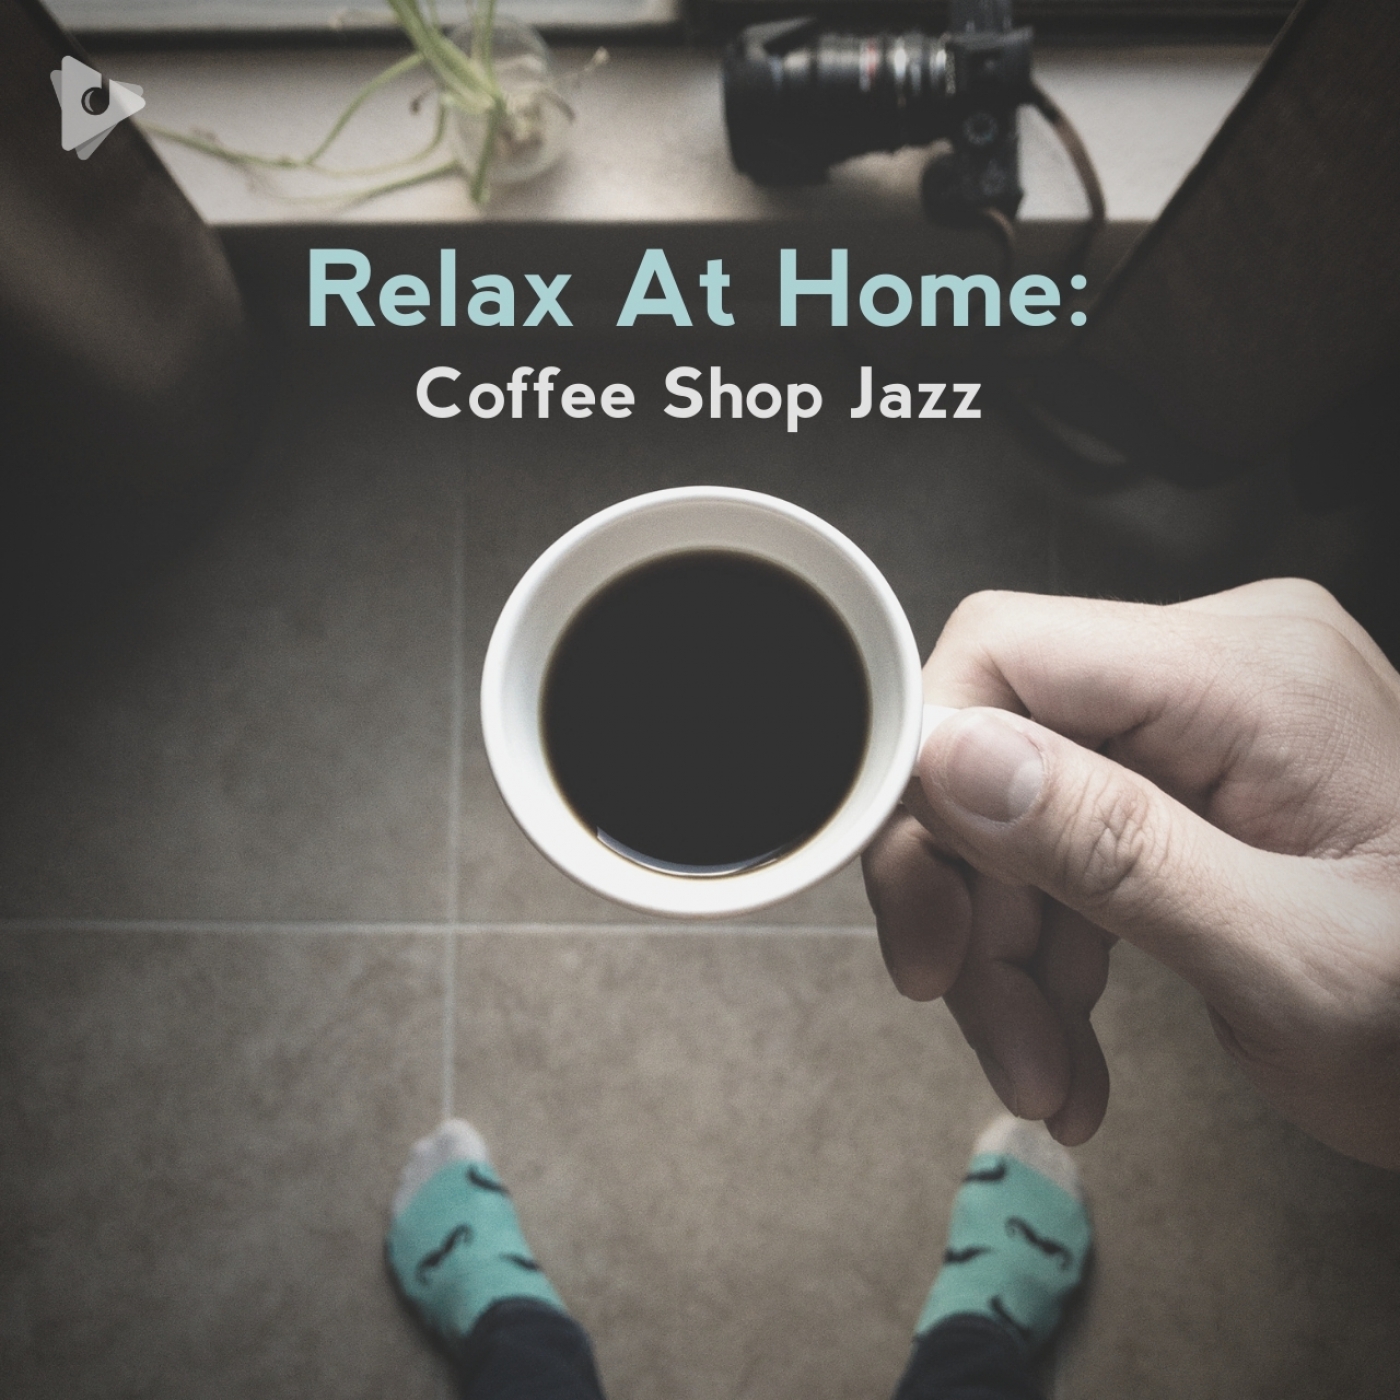 Relax At Home: Coffee Shop Jazz